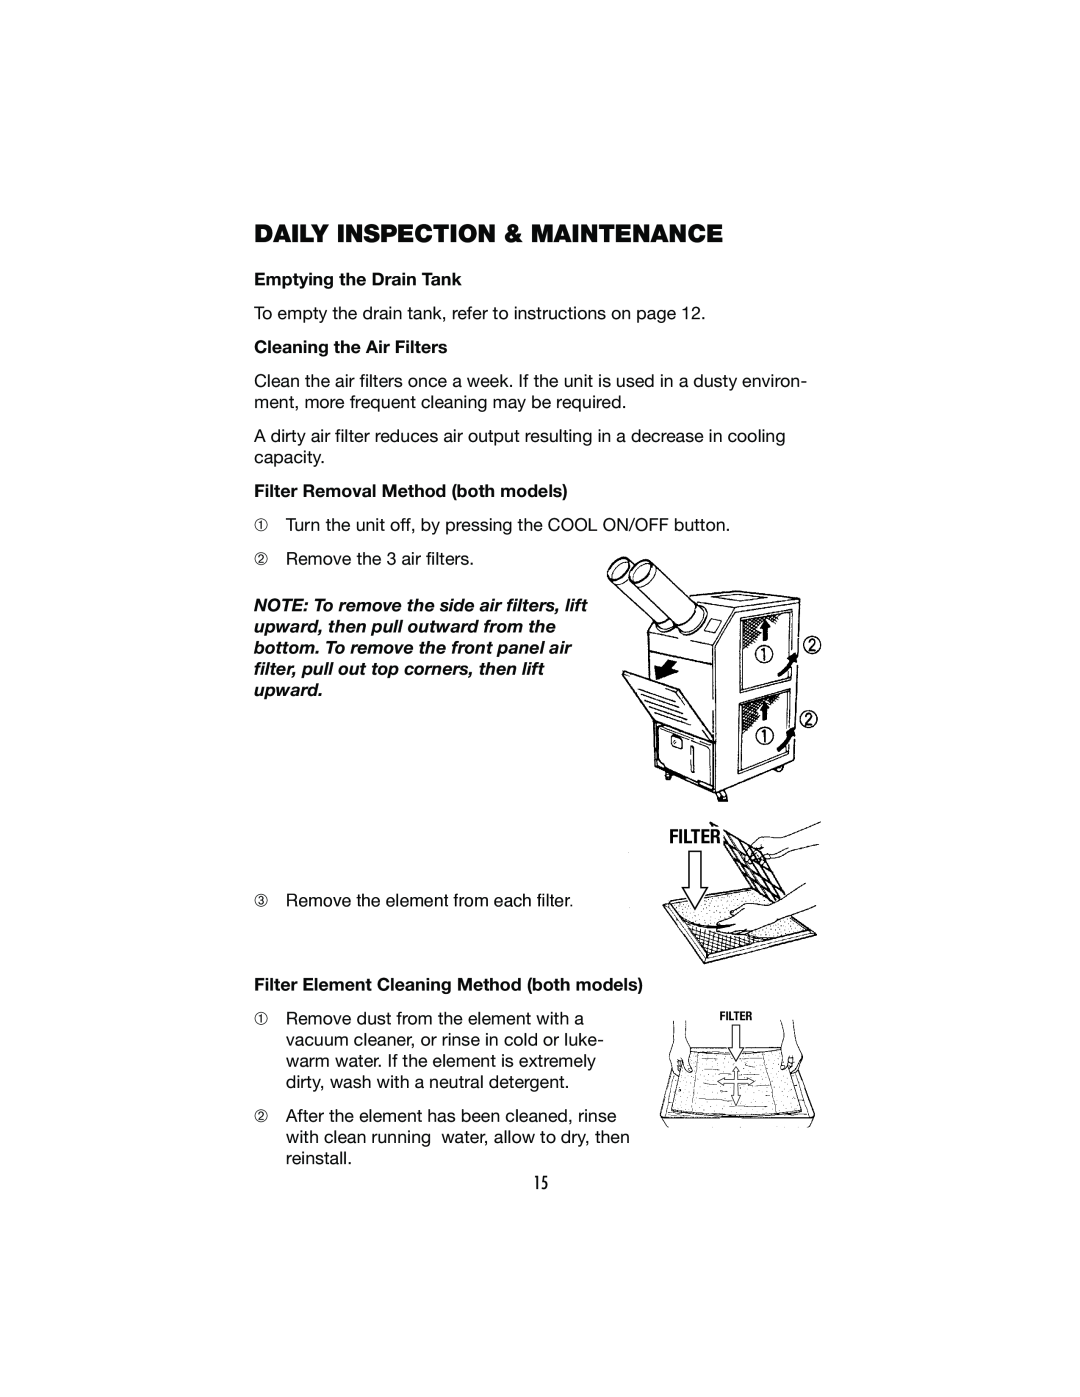 Denso CLASSIC PLUS 14, CLASSIC PLUS 26 operation manual Daily Inspection & Maintenance, Filter 